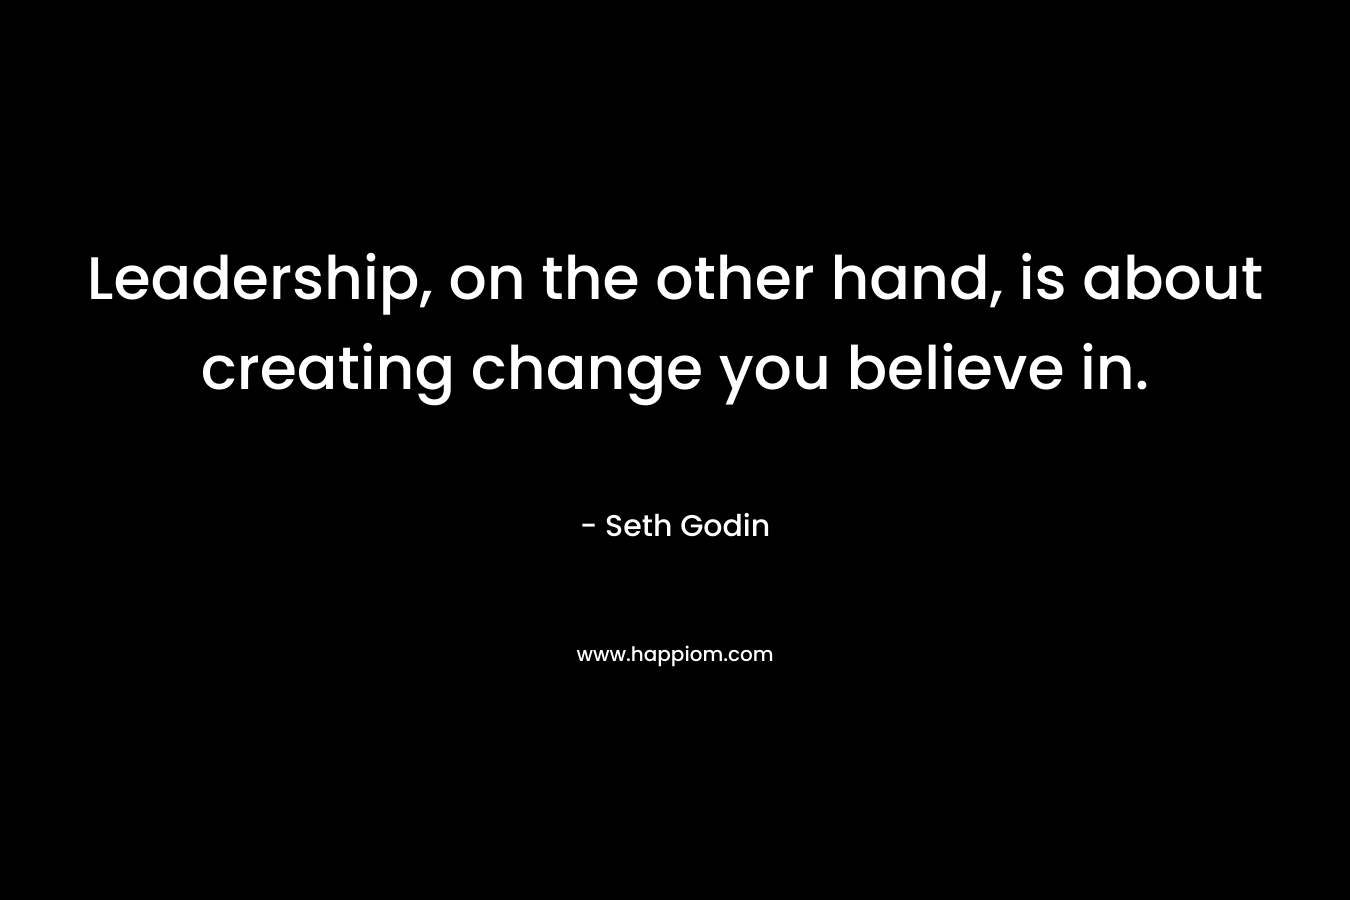 Leadership, on the other hand, is about creating change you believe in. – Seth Godin